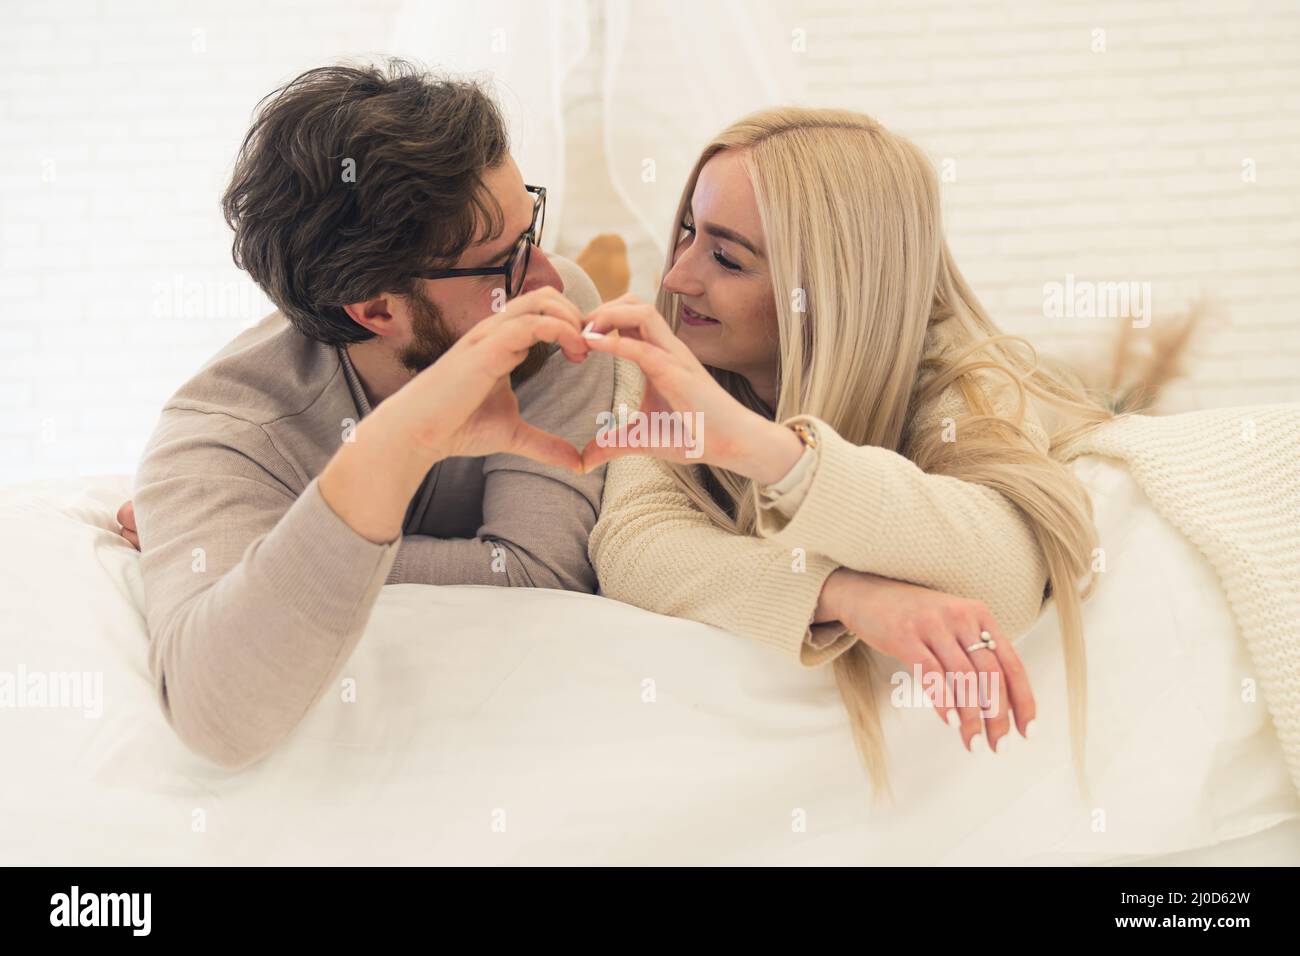 adorable young couple lying on the bed making a heart shape together with their hands. High quality photo Stock Photo